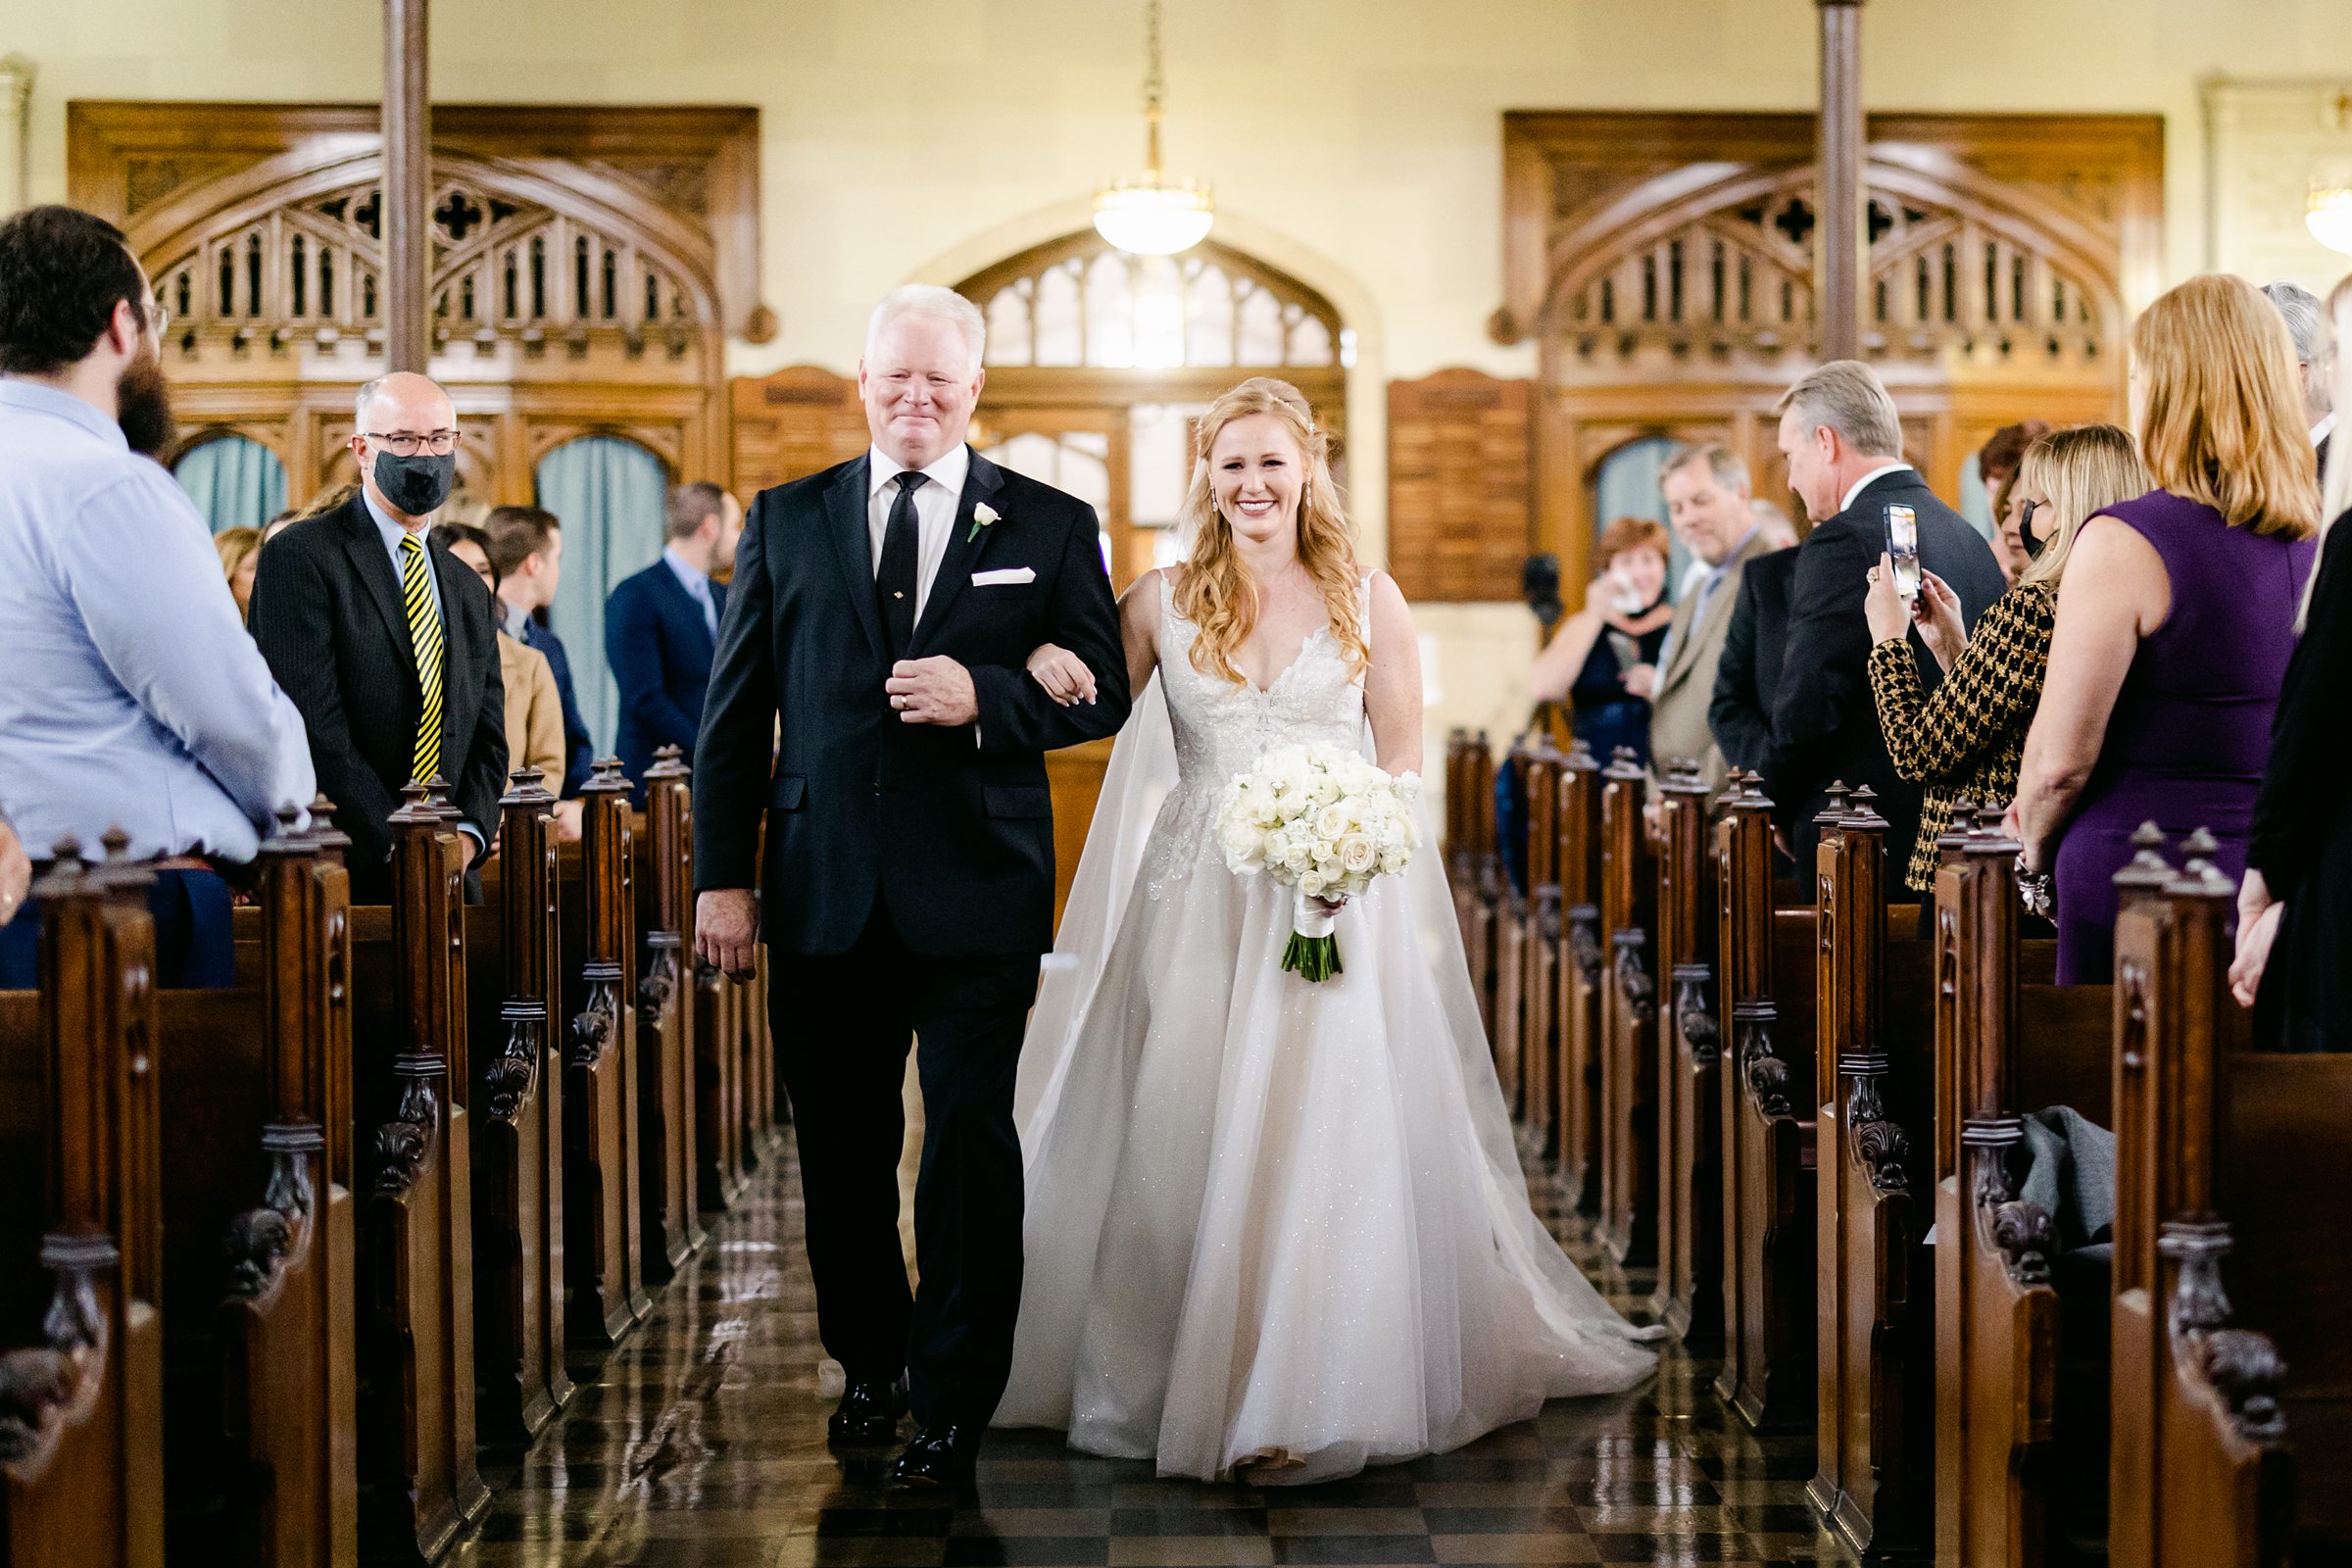 Dad walking bride down the aisle at Marysgrove Catholic Church in Detroit Michigan by Michele Maloney Photography